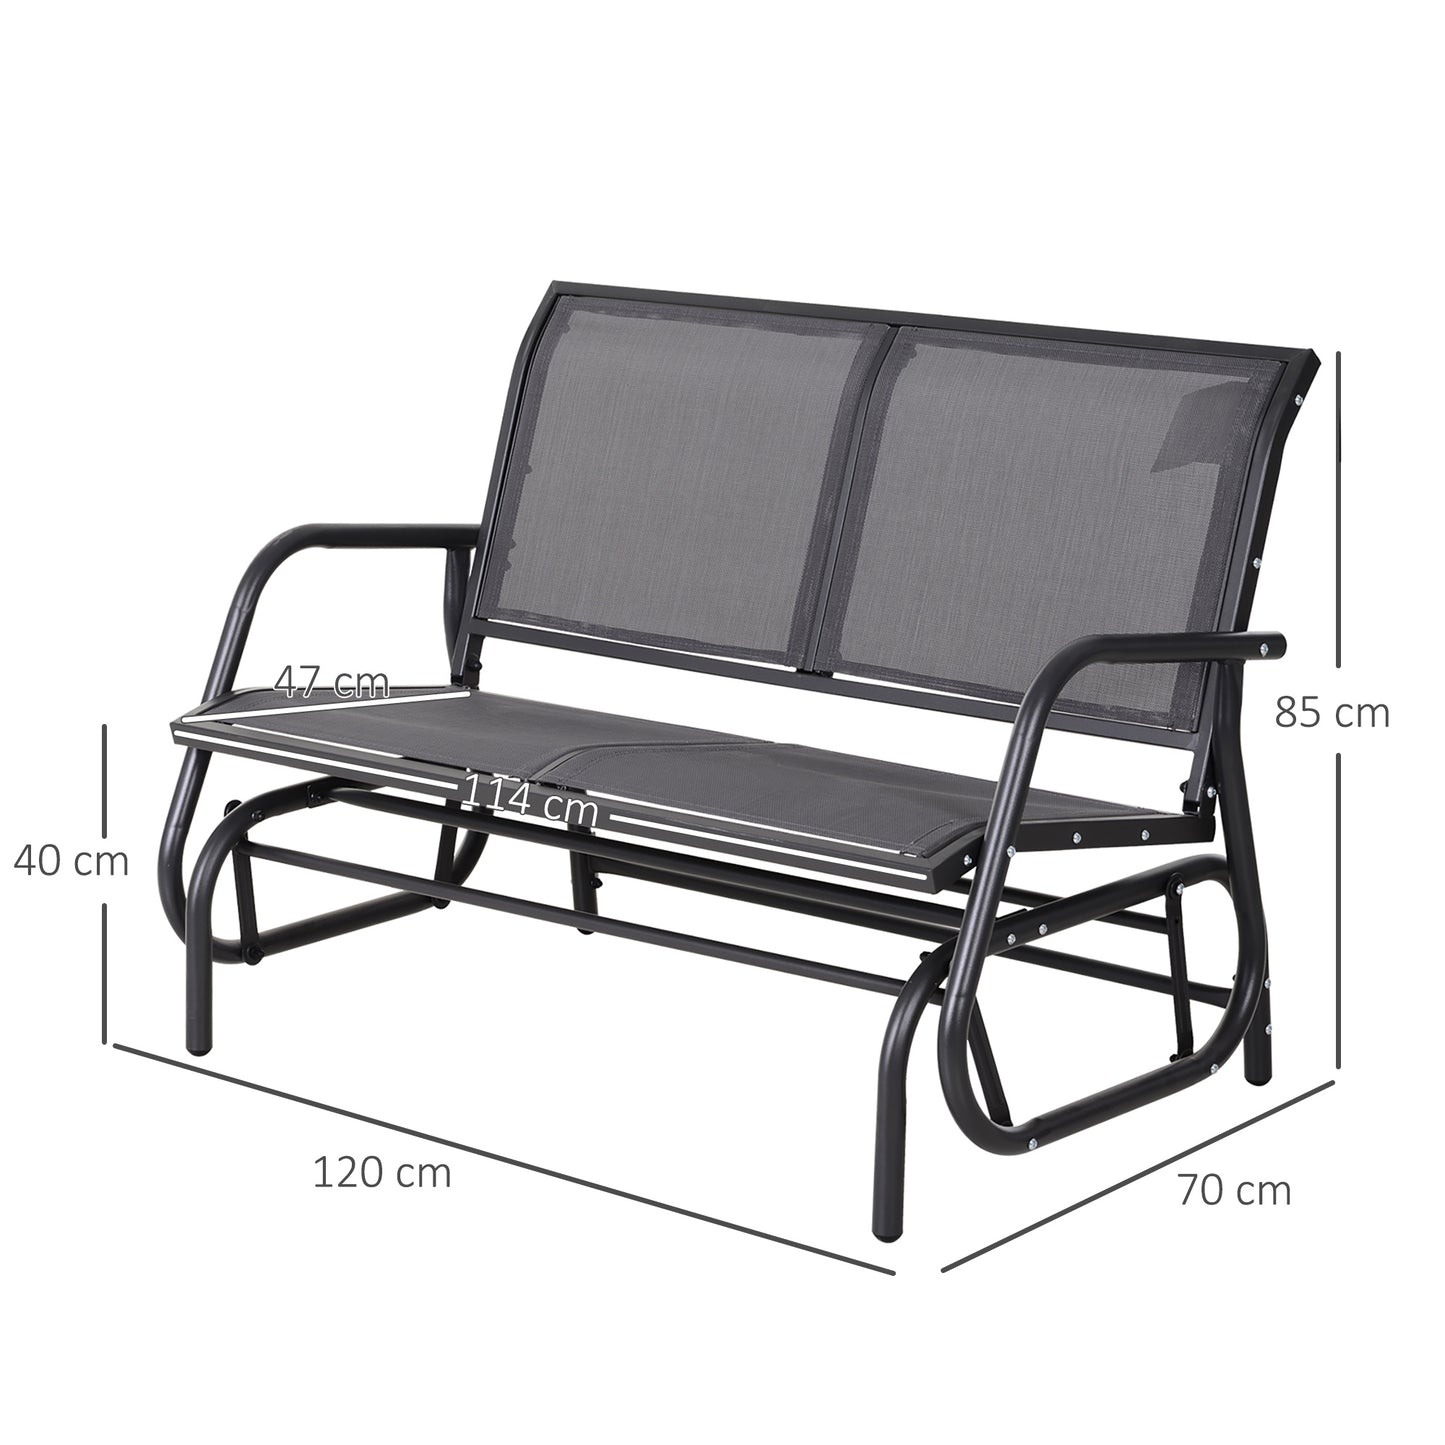 Outsunny 2-Person Outdoor Glider Bench Patio Double Swing Chair Loveseat w/Power Coated Steel Frame for Backyard Garden Porch, Grey